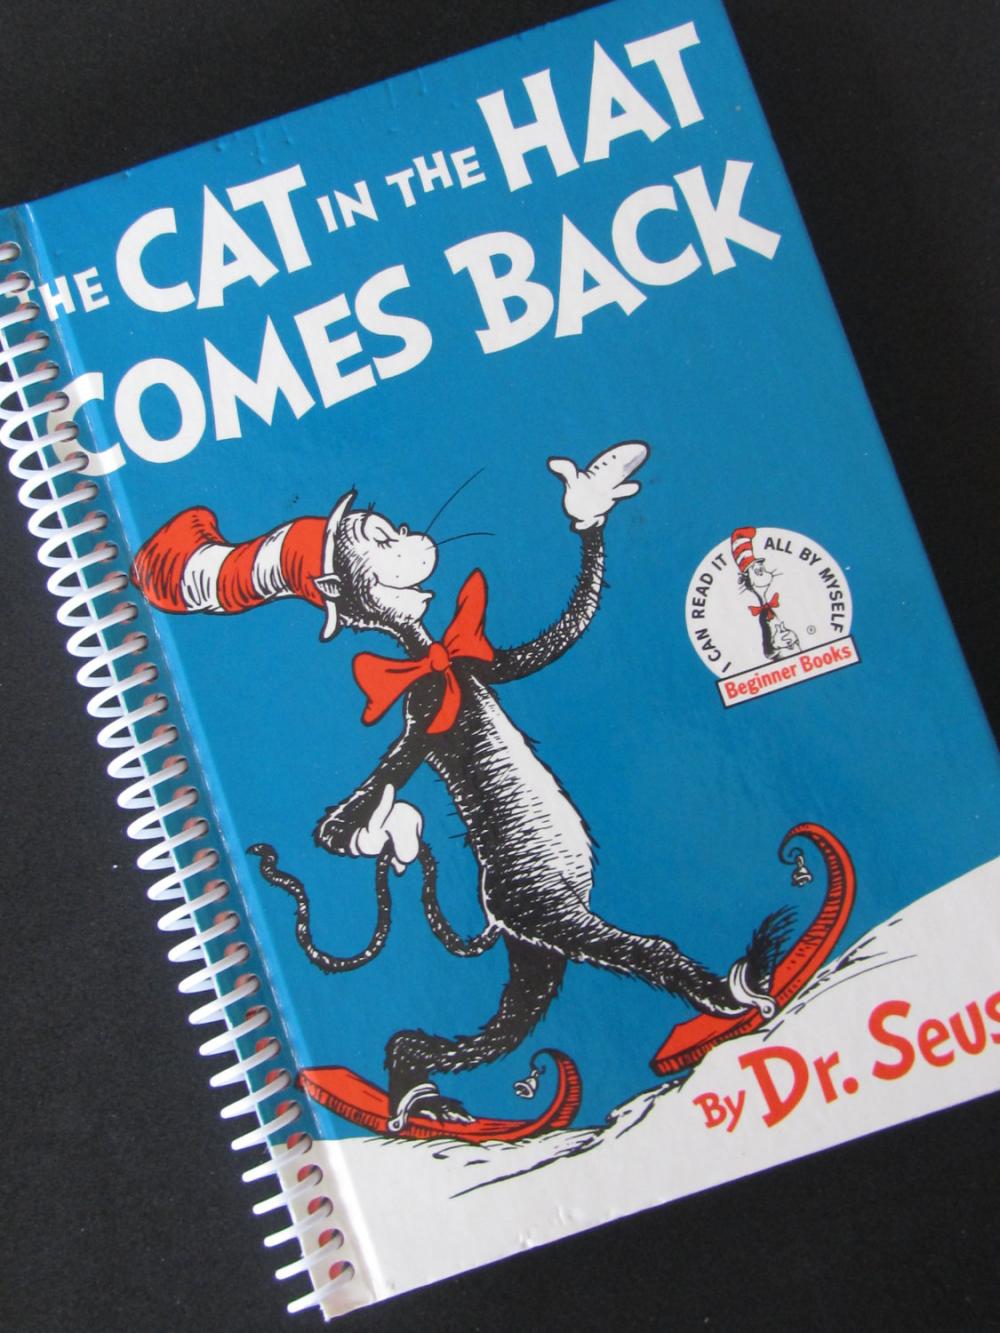 The Cat In The Hat Comes Back Dr. Seuss Notebook Journal Upcycled Book